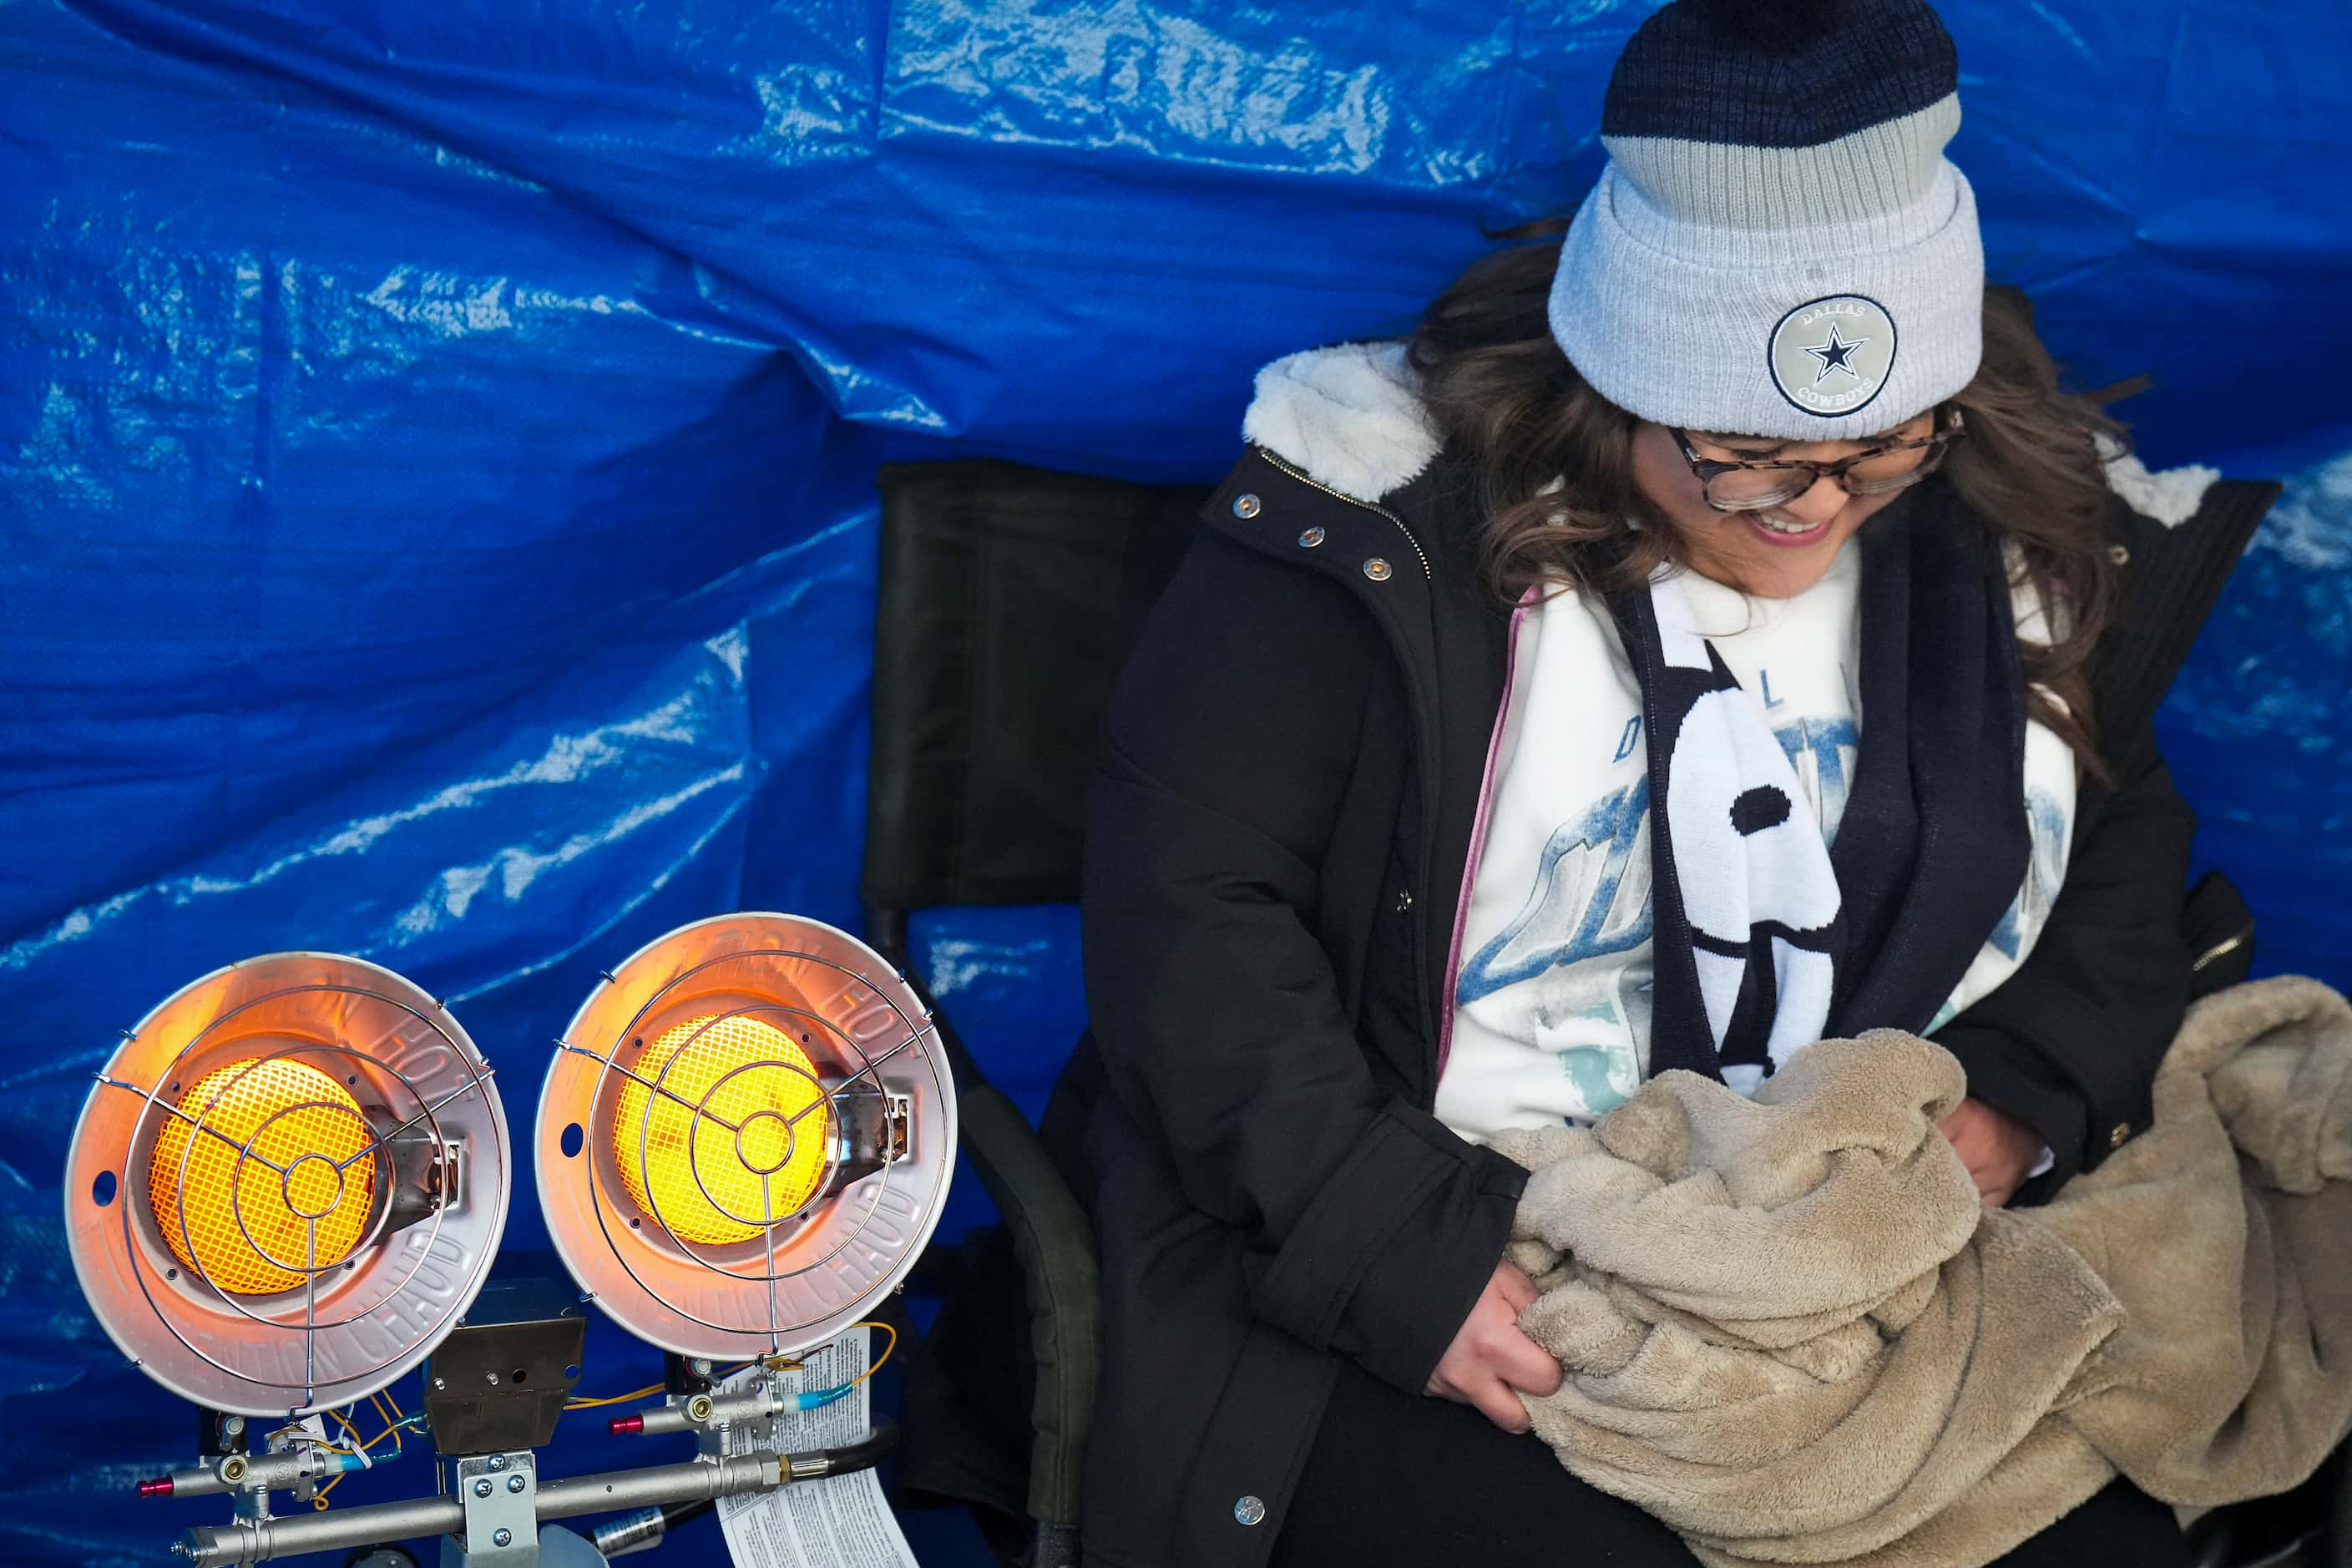 Dallas Cowboys fan Kami Reyes huddles next to a heater while tailgating before an NFL...